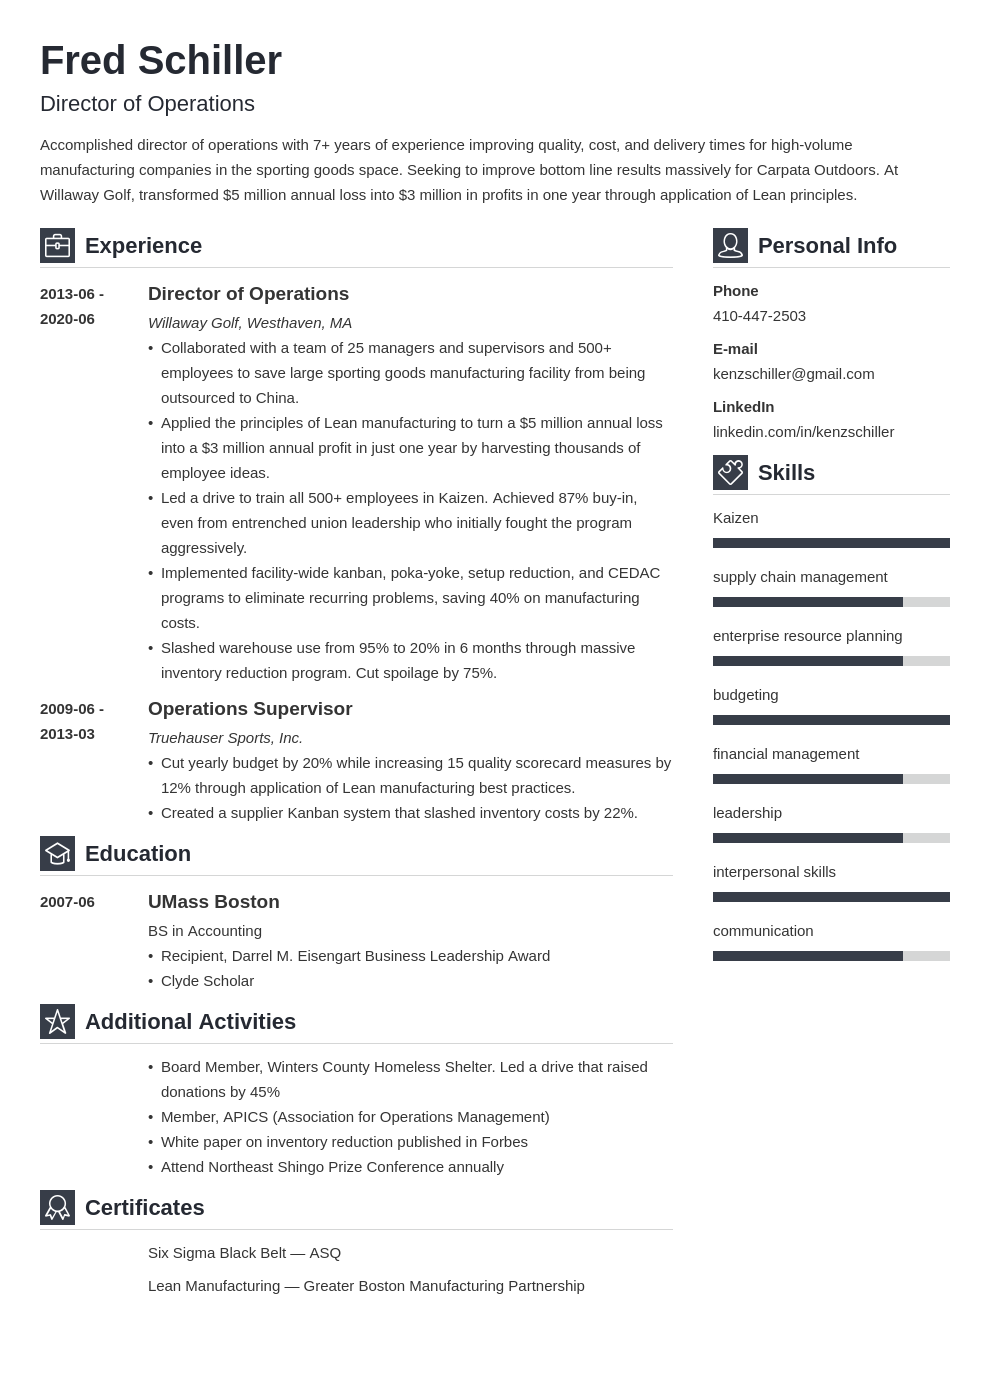 Director of Operations Resume: Examples and Guide [10+ Tips]